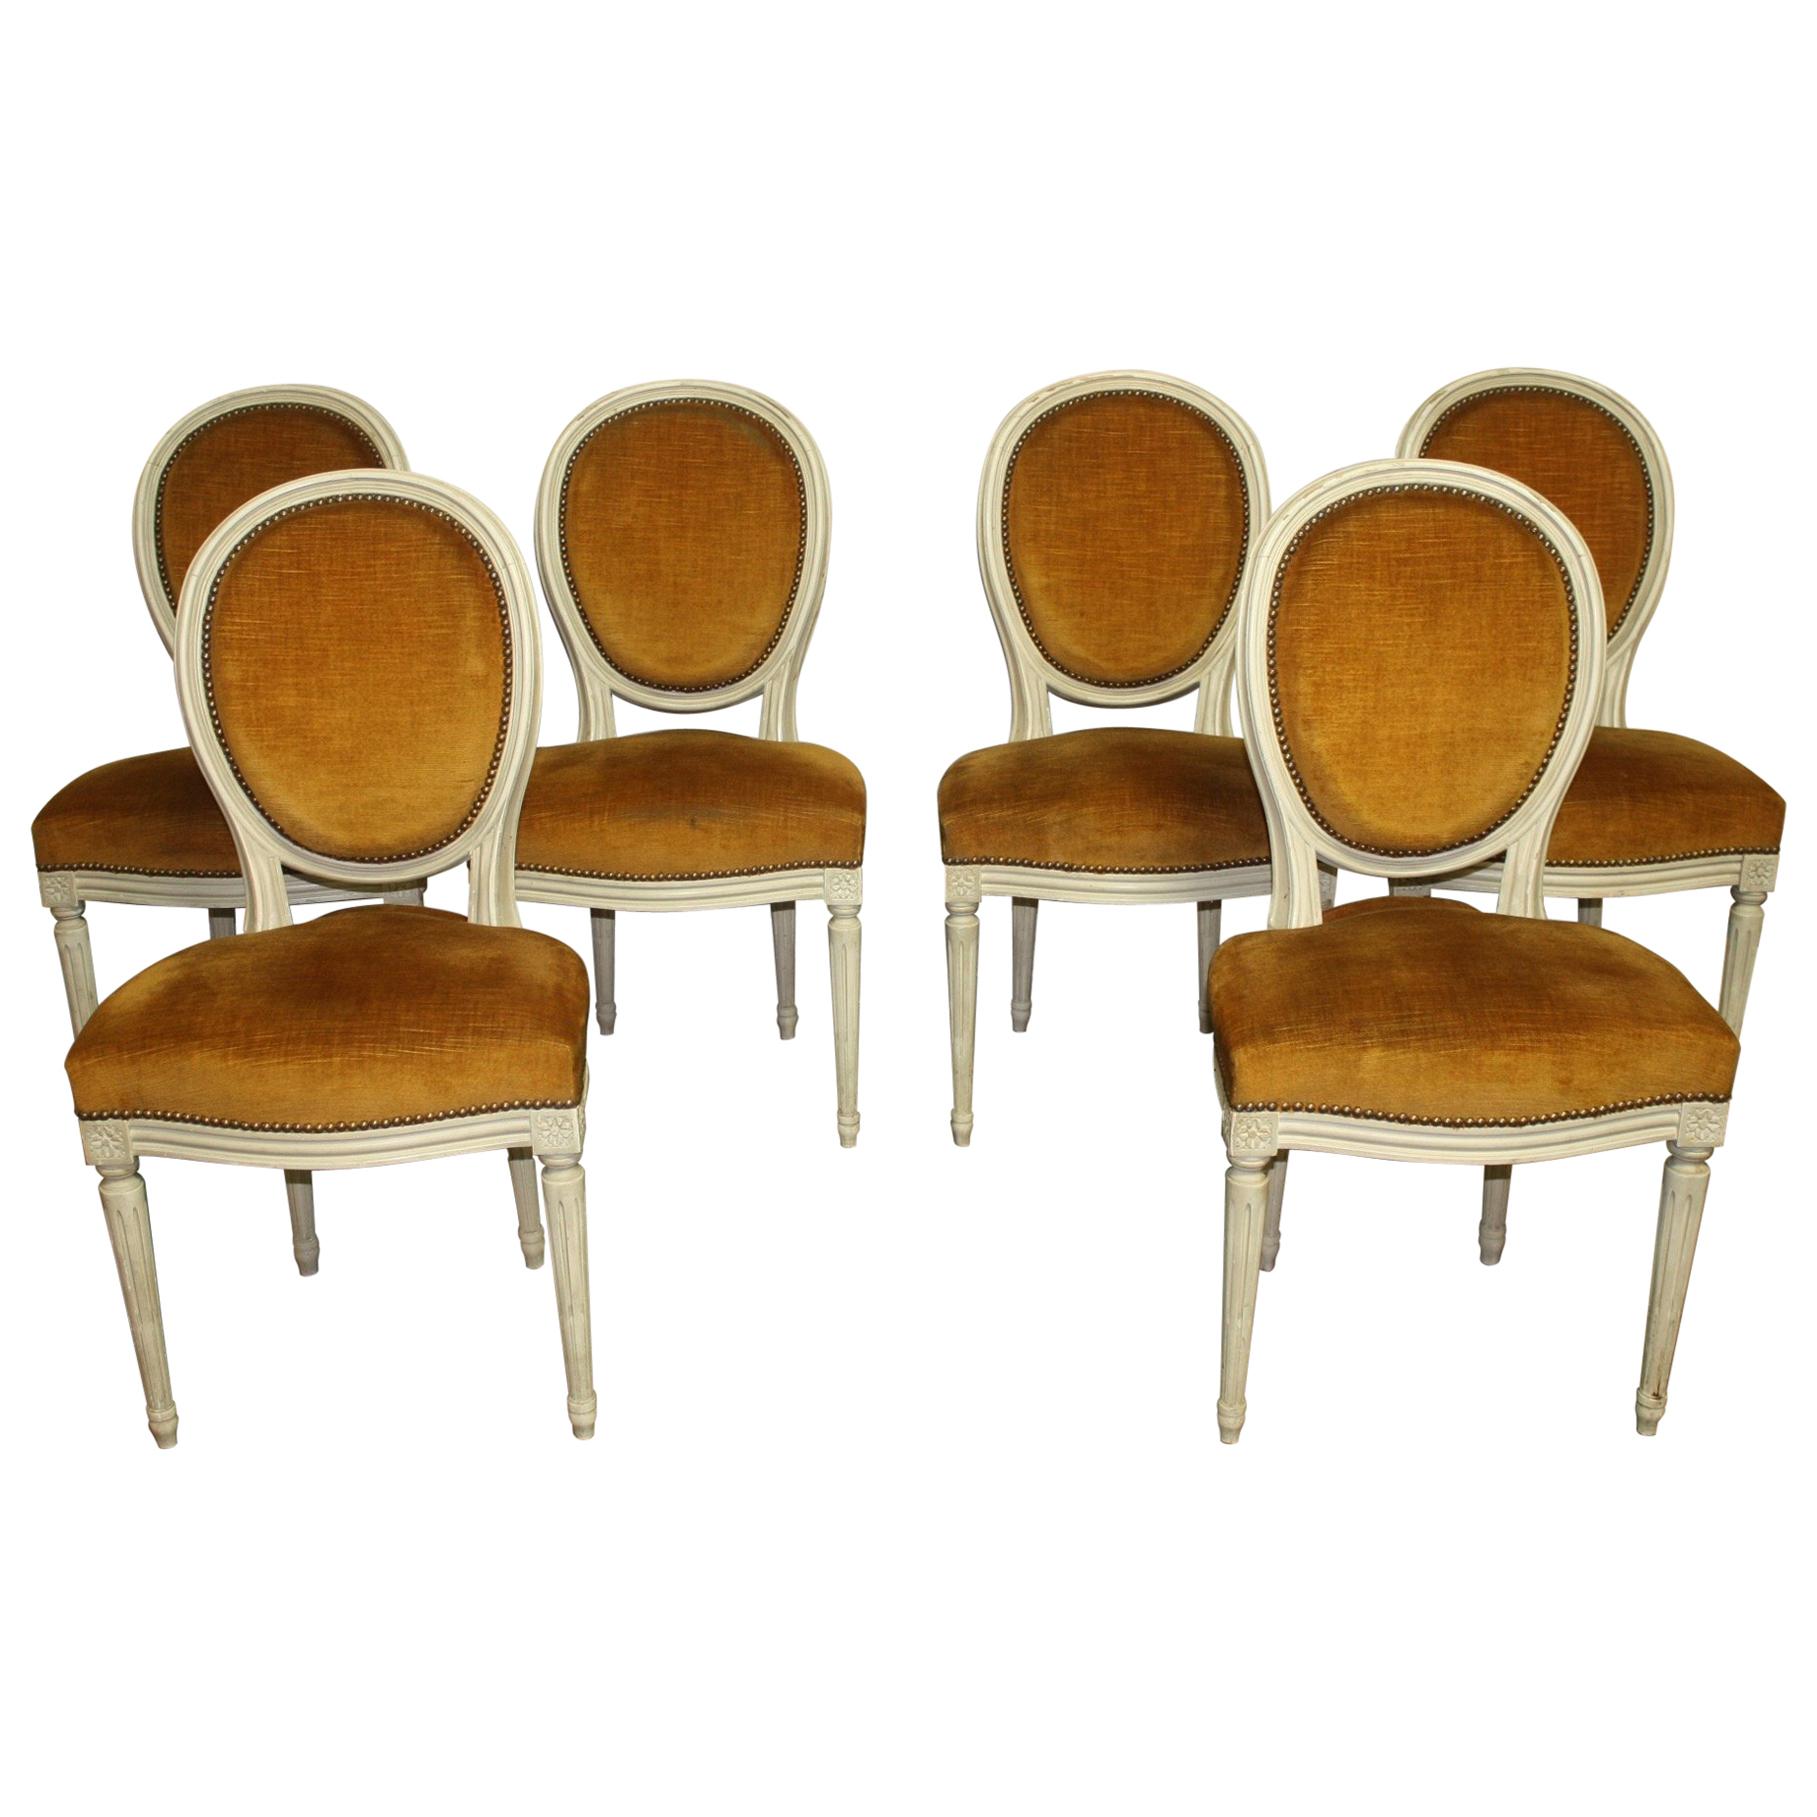 Exquisite Set of Six Louis XVI French Chairs